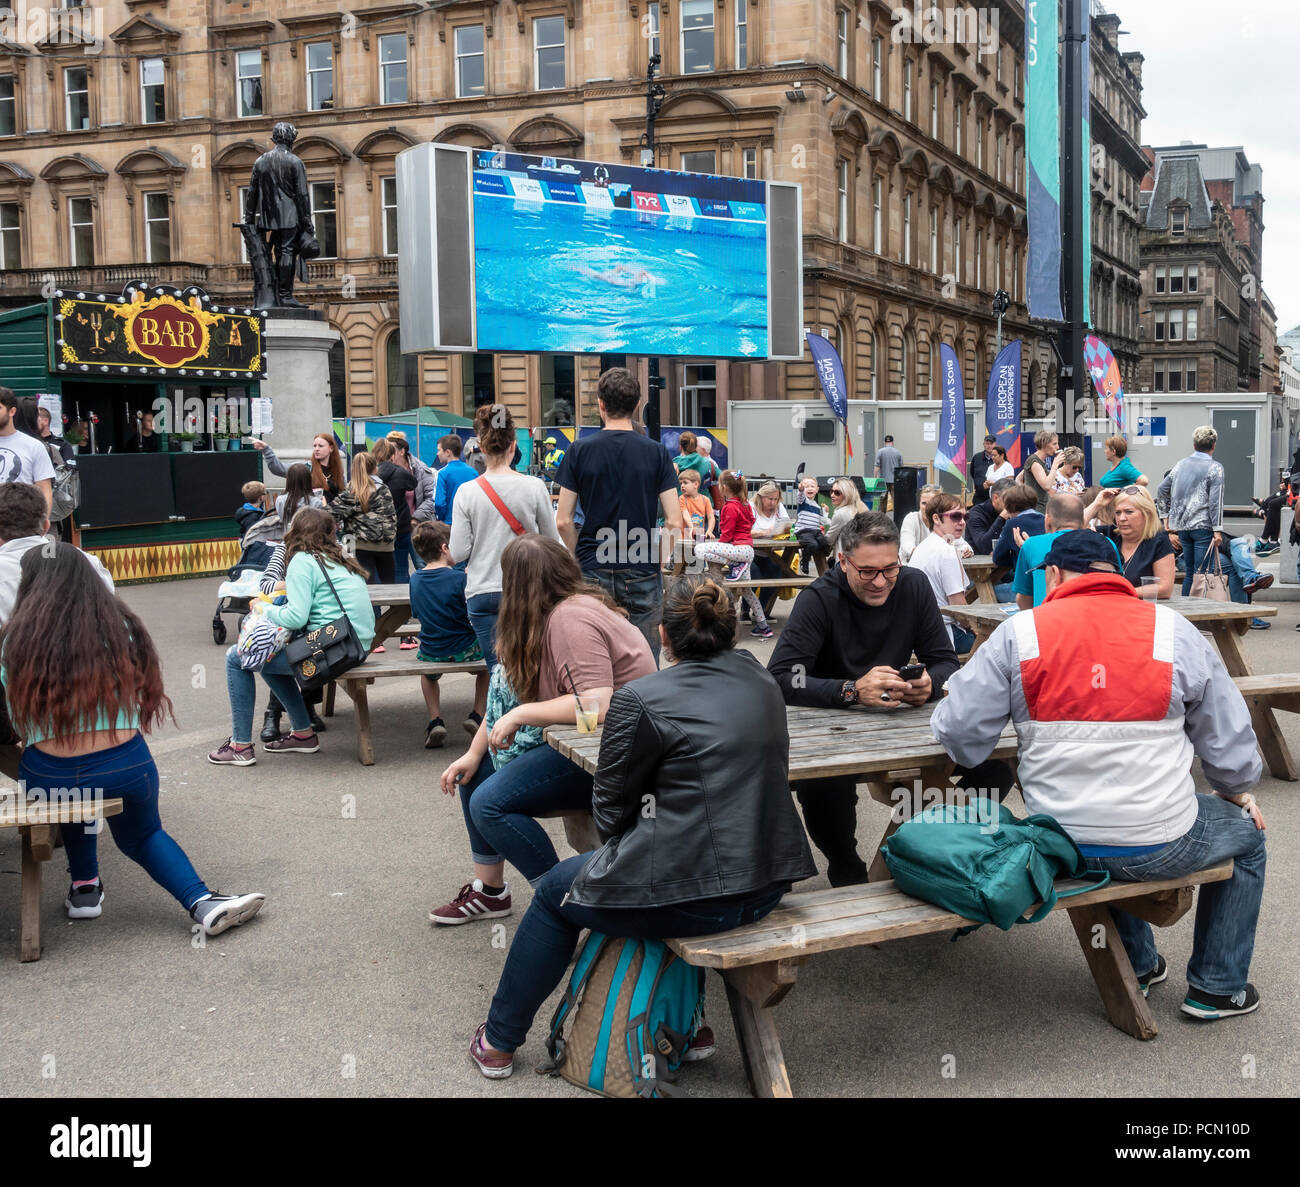 George Square; Glasgow; Scotland. 03rd August 2018. People out and about in George Square in the centre of Glasgow relaxing and enjoying Festival 2018. The festival is running in parallel with the European Championships, Glasgow 2018. George Square is a free venue with several live and virtual attractions daily. There is a big screen showing live coverage of the sports competition action. In this photo, synchronised swimming is being shown. Credit: Elizabeth Leyden/Alamy Live News Stock Photo